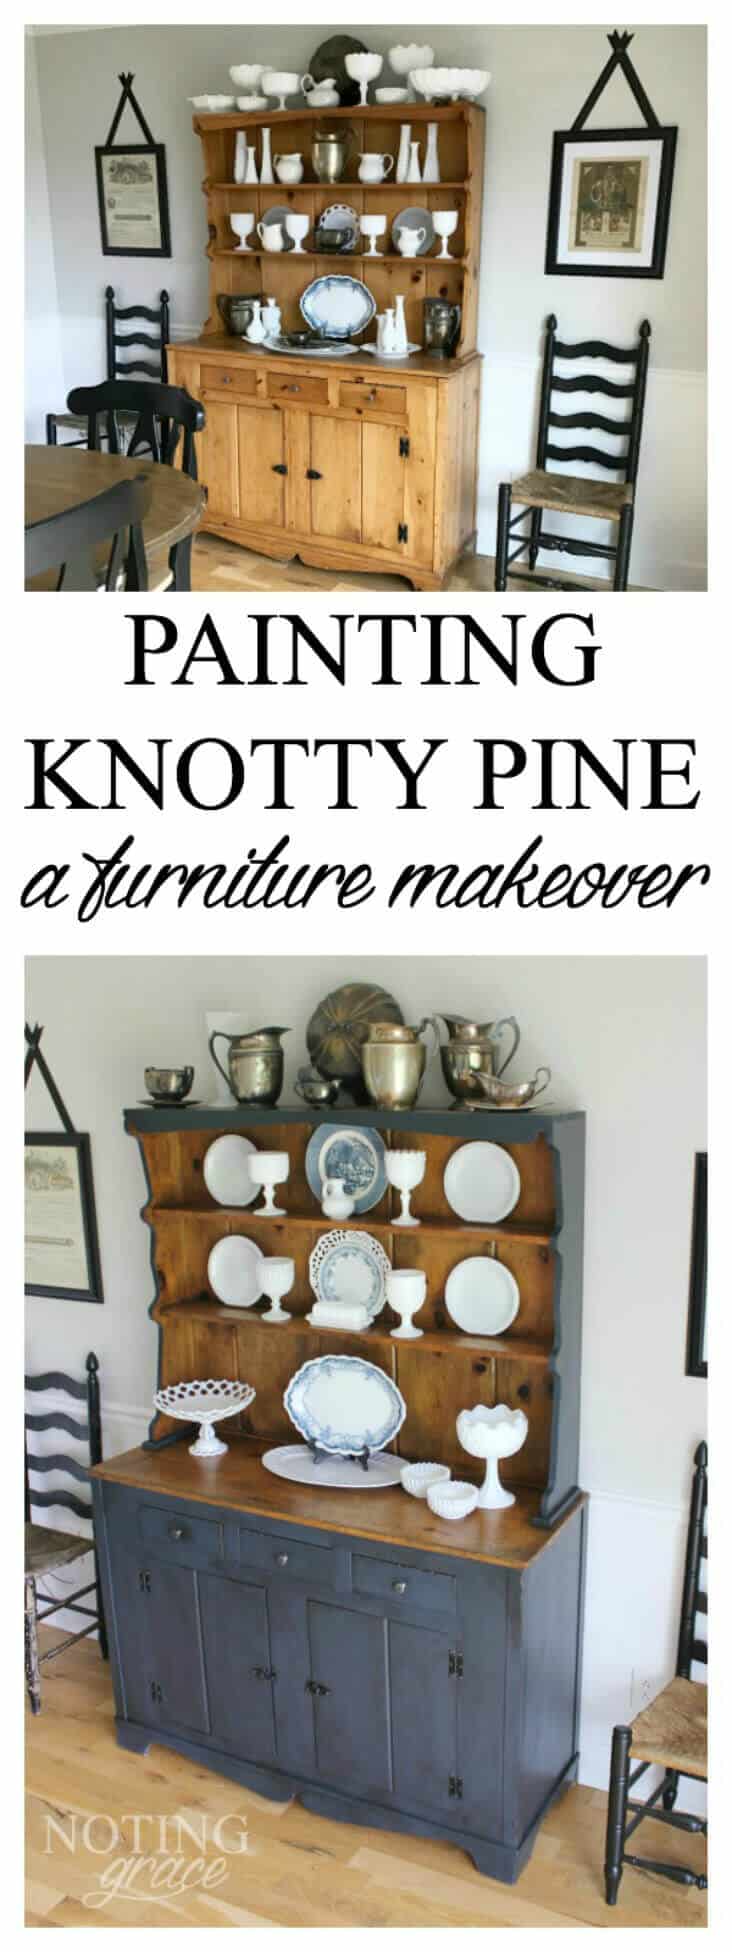 Painting Knotty Pine - Noting Grace shares how she hid her orangey hues in her pine hutch with this painting technique